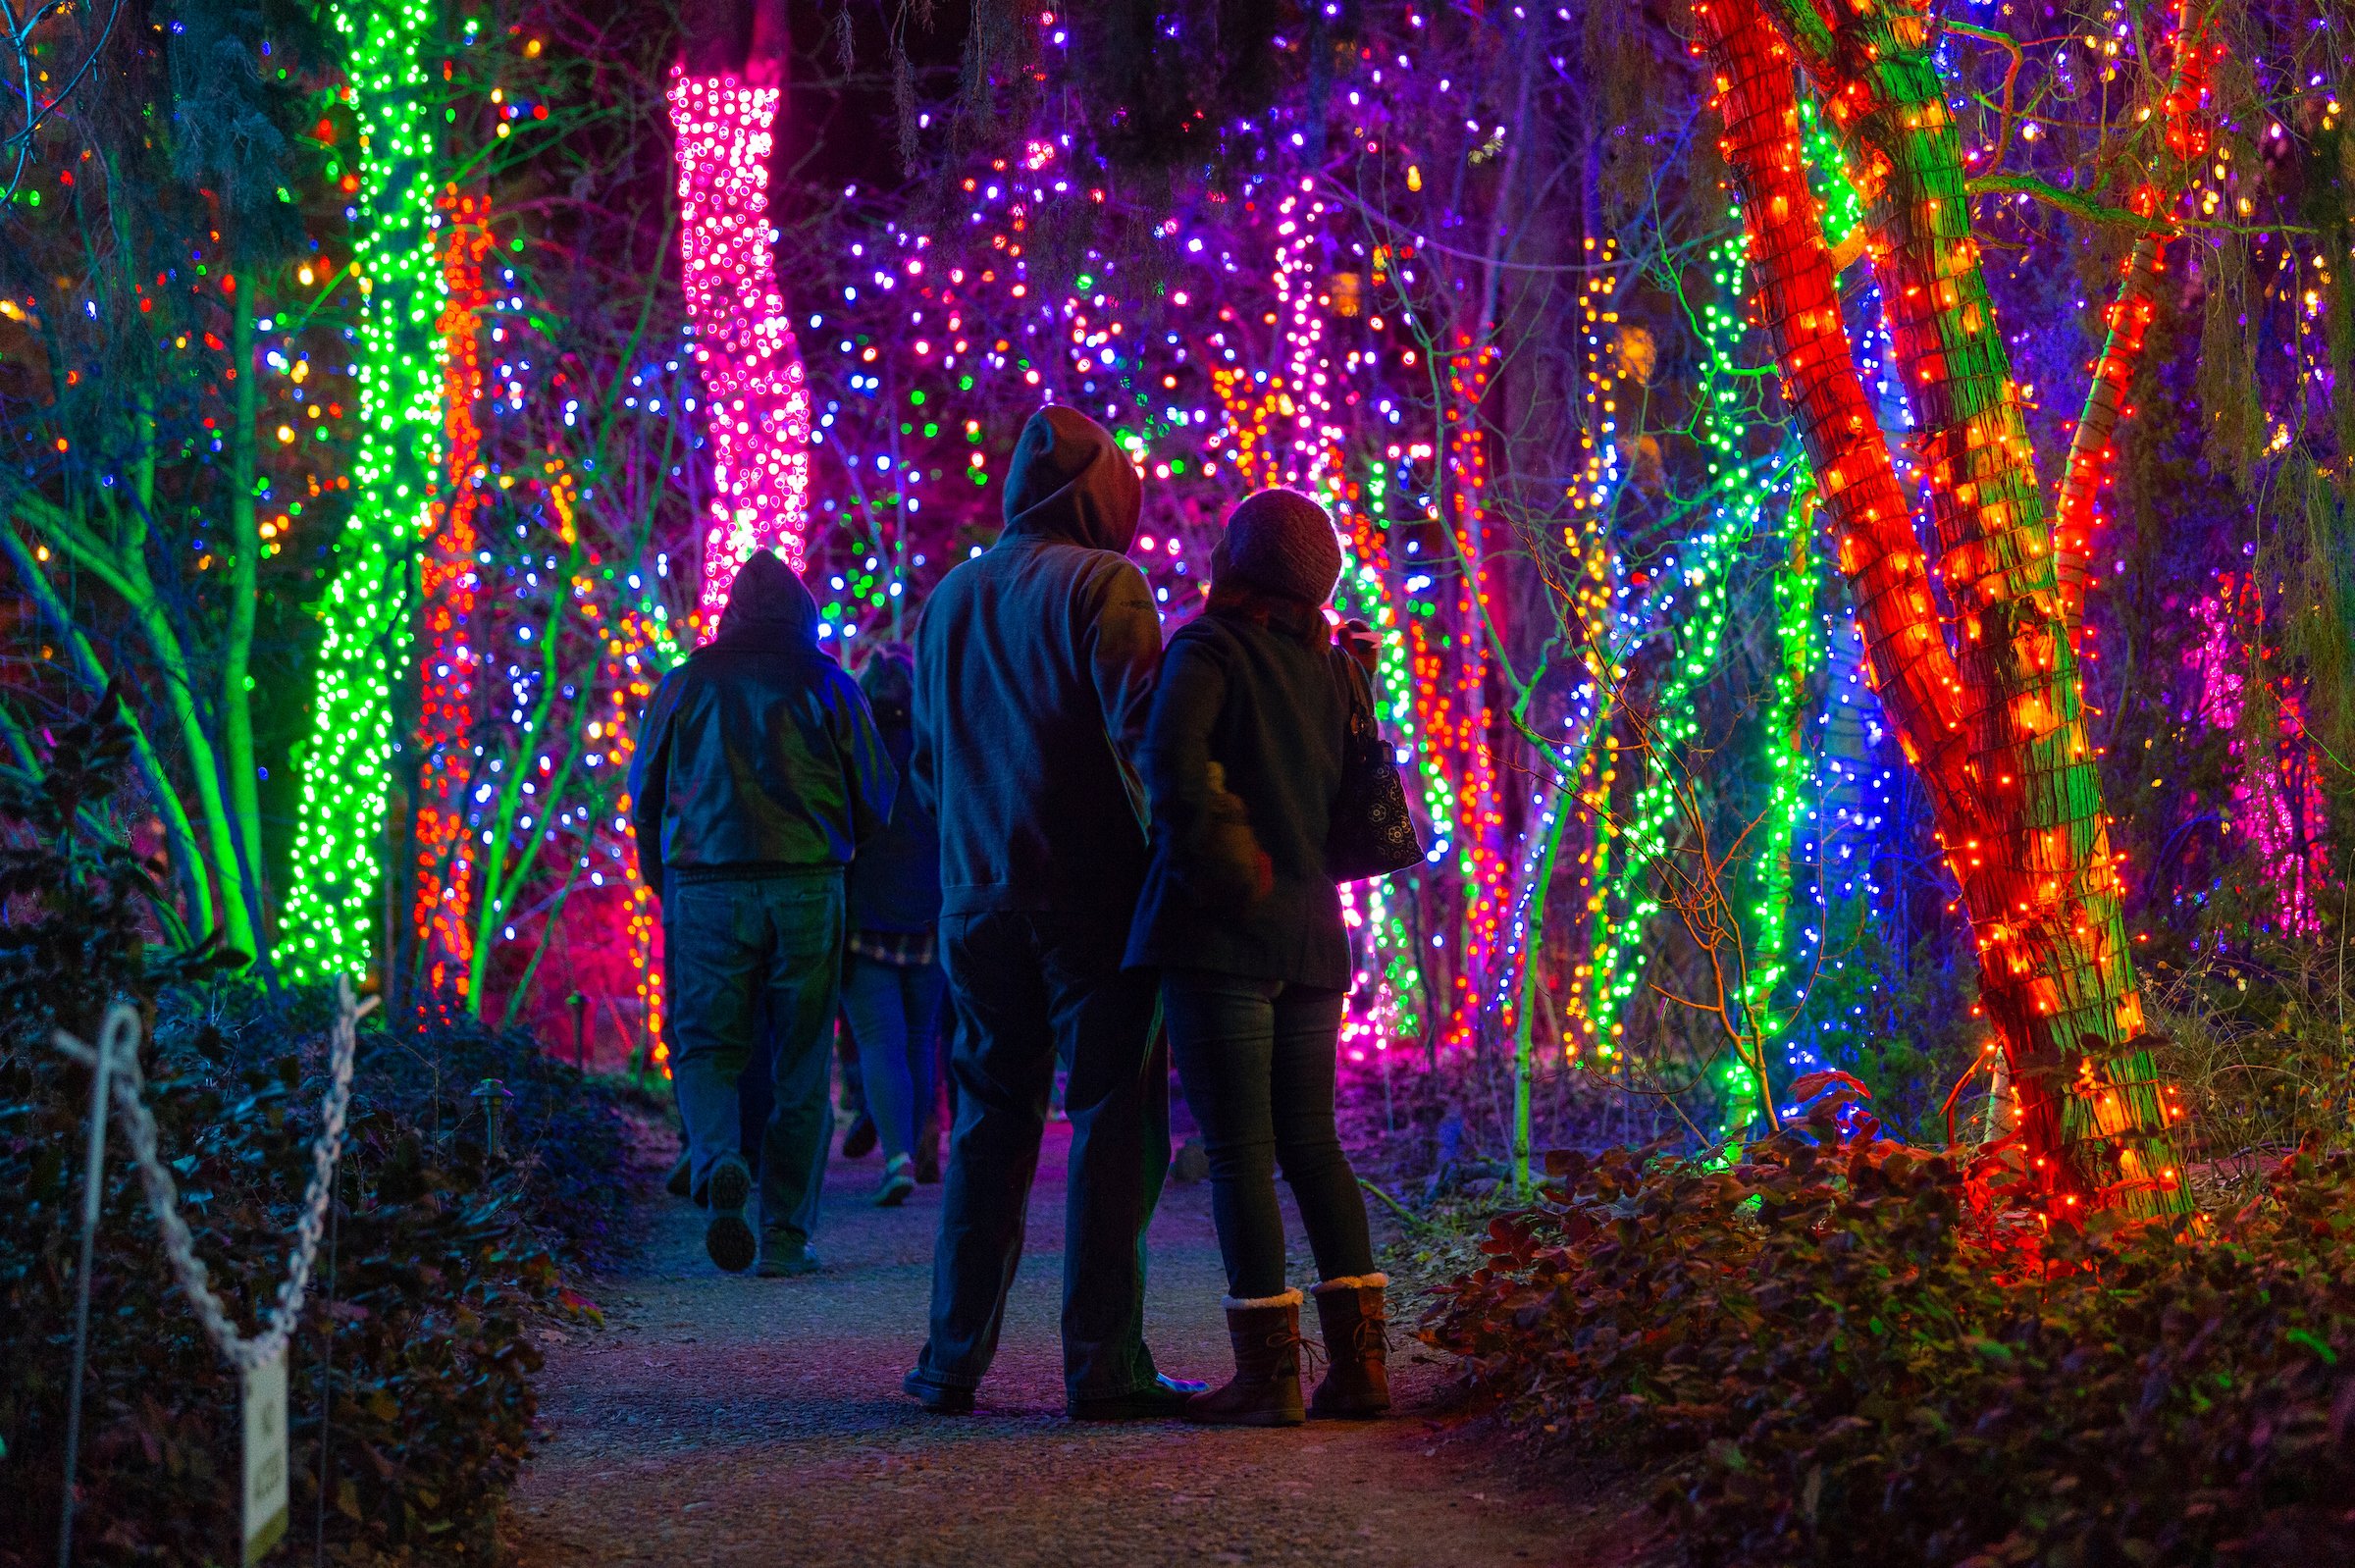 Denver Botanic Gardens on Twitter: "Tickets are now on for Blossoms of Light! tickets each night, will sell out in advance. The event takes place nightly November 29 - January